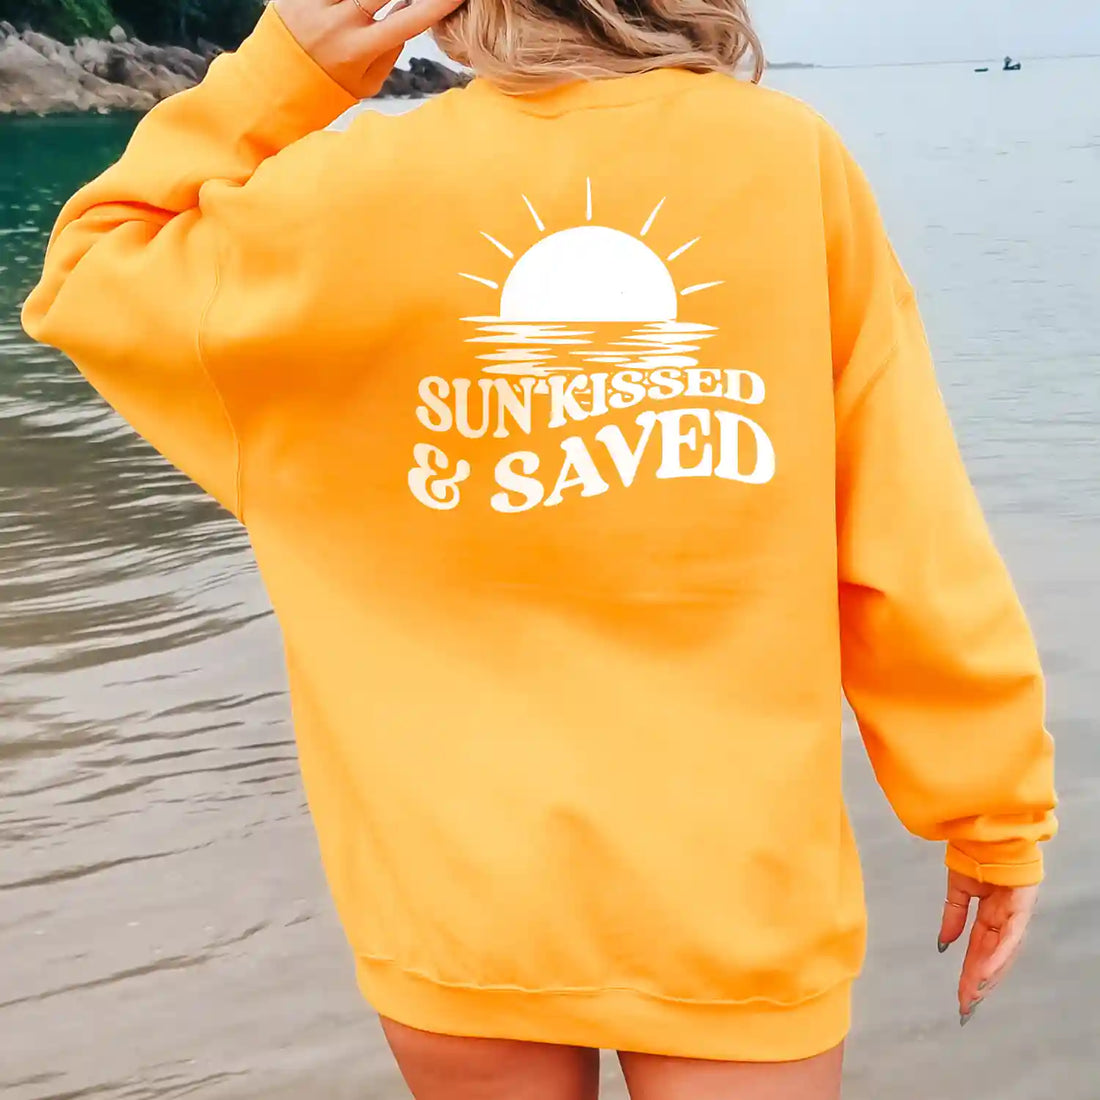 A woman wearing a Sunkissed & Saved Sweatshirt by Be Still and Know with the word "sunstruck" prominently displayed.